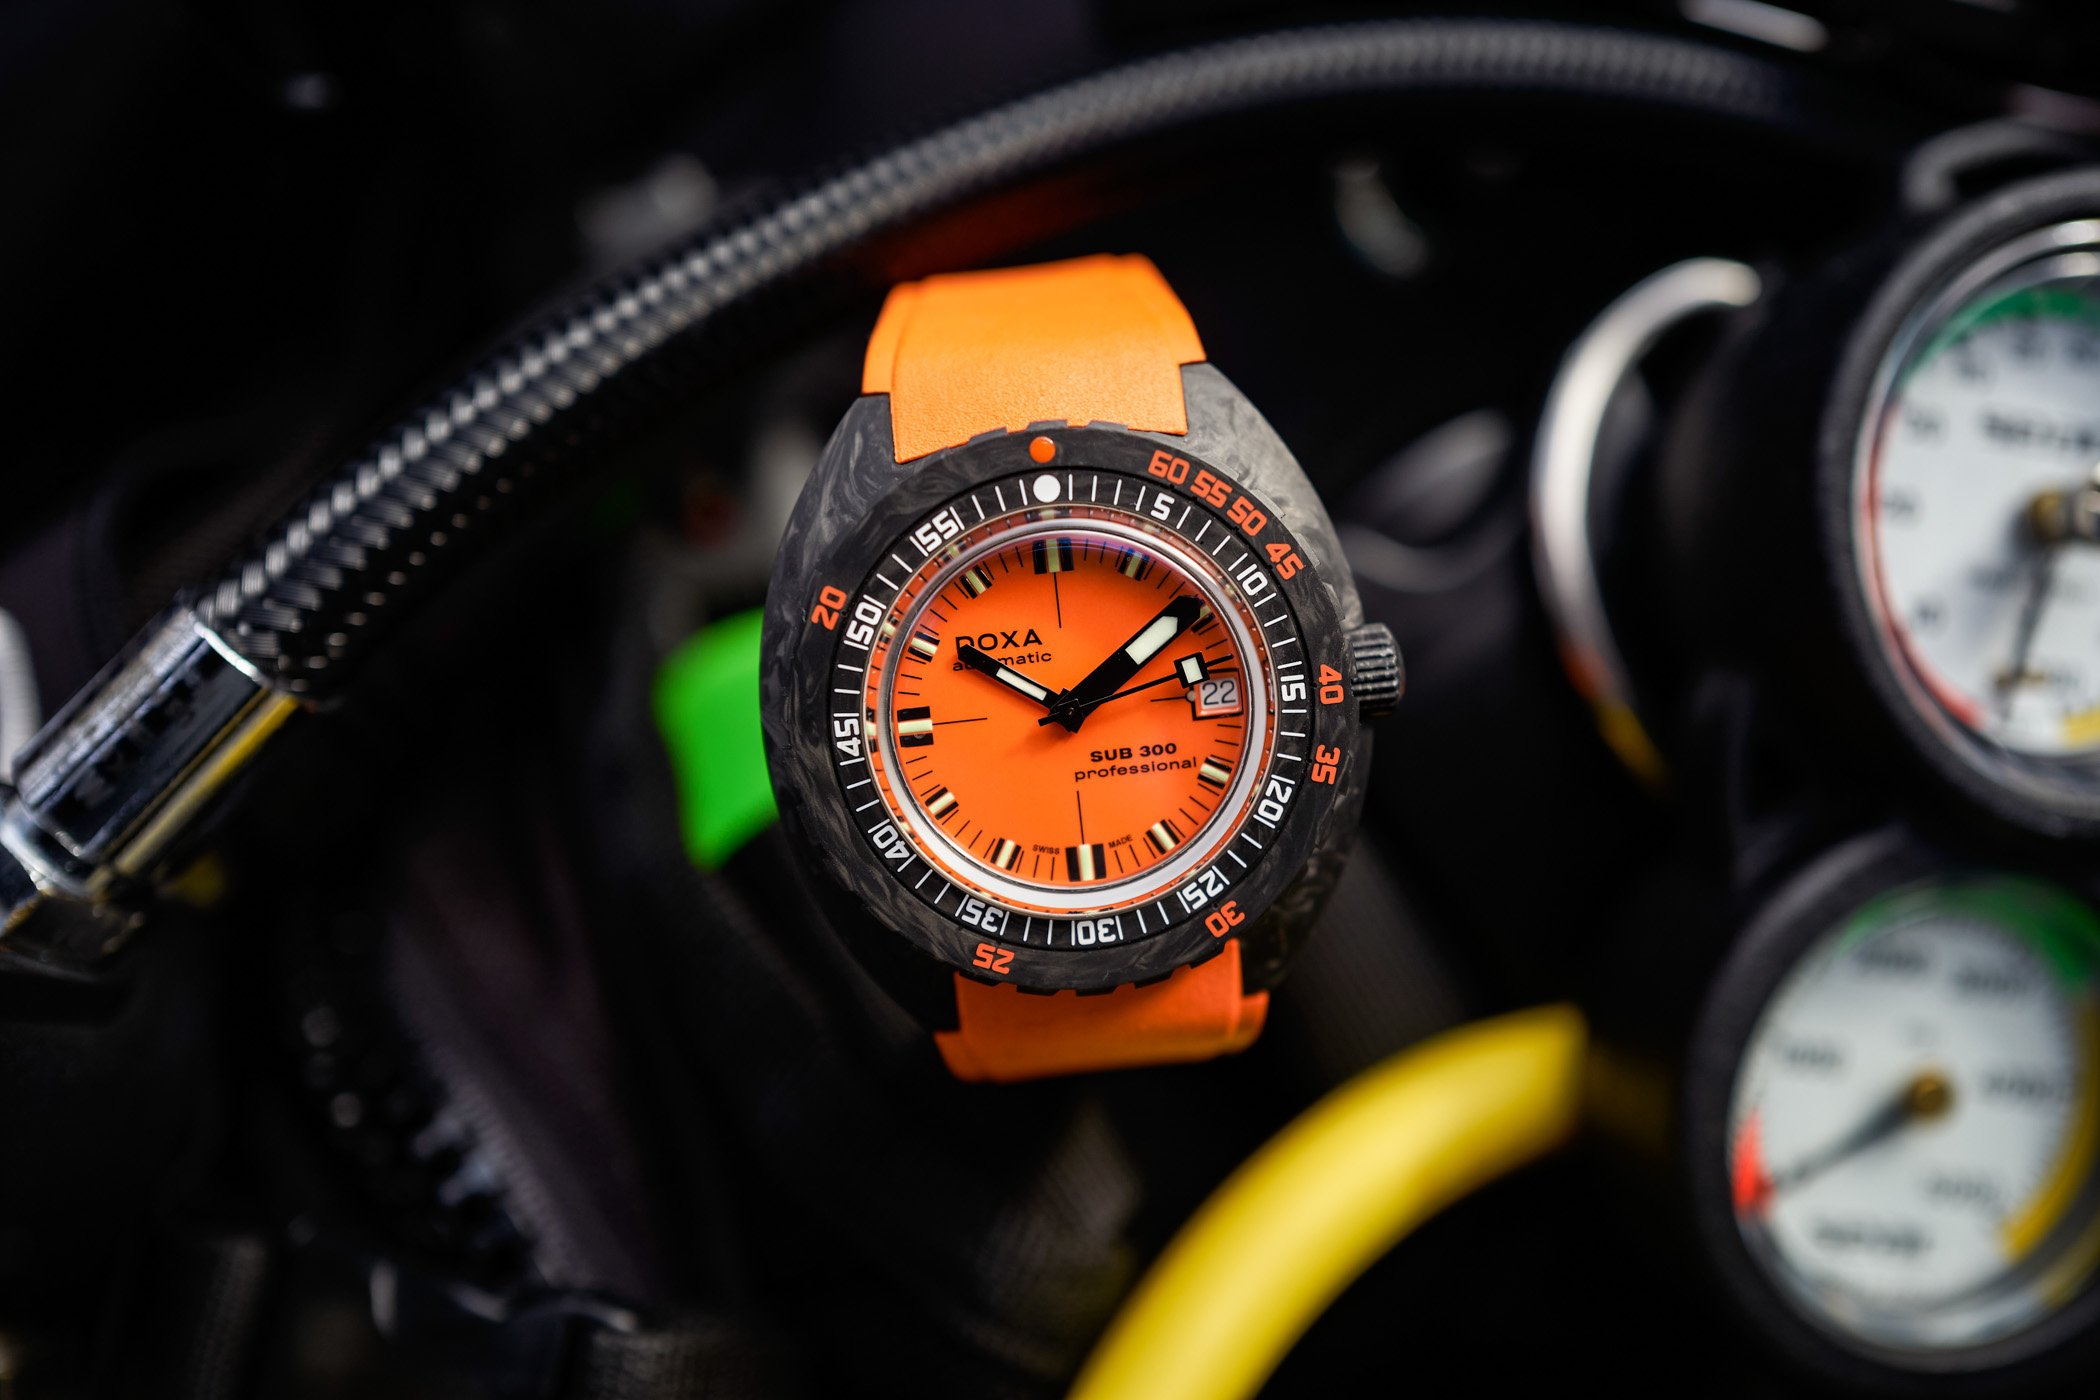 Doxa SUB 300 Carbon Professional Orange - Dive watch review